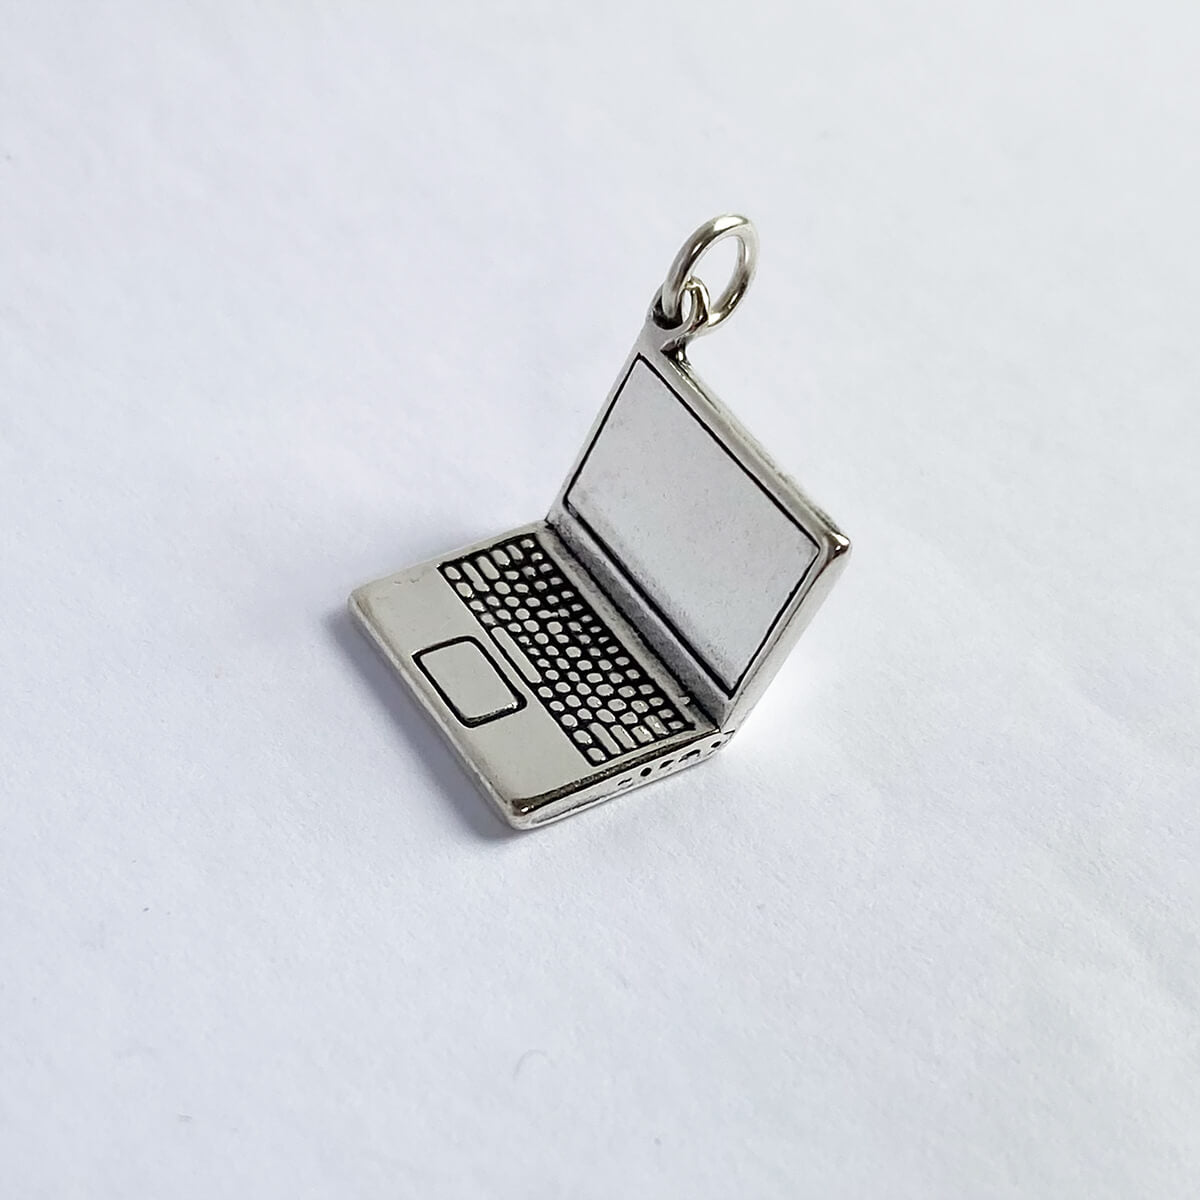 Laptop charm computer sterling silver pendant from Charmarama Charms